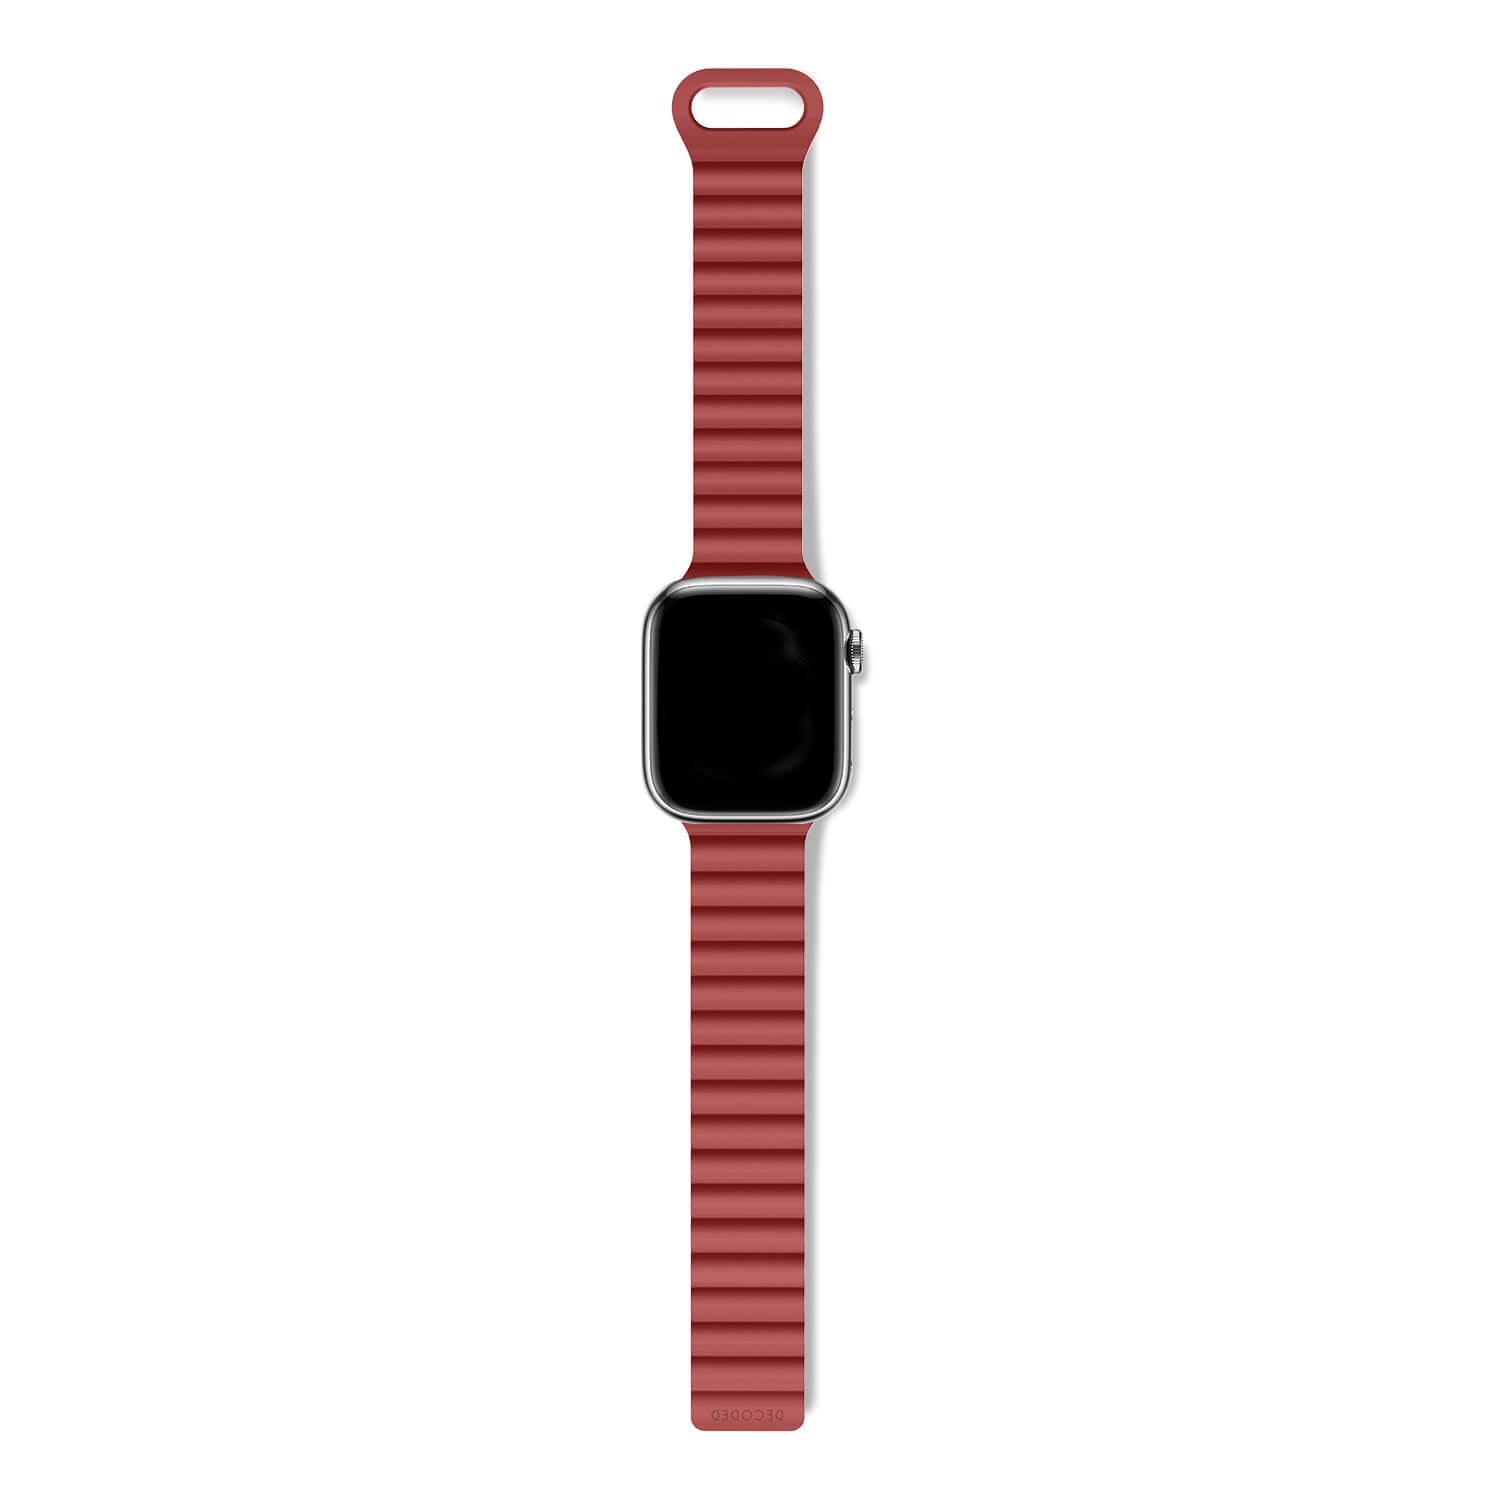 Silicone Traction Loop Strap Apple Watch 38mm, Astro Dust